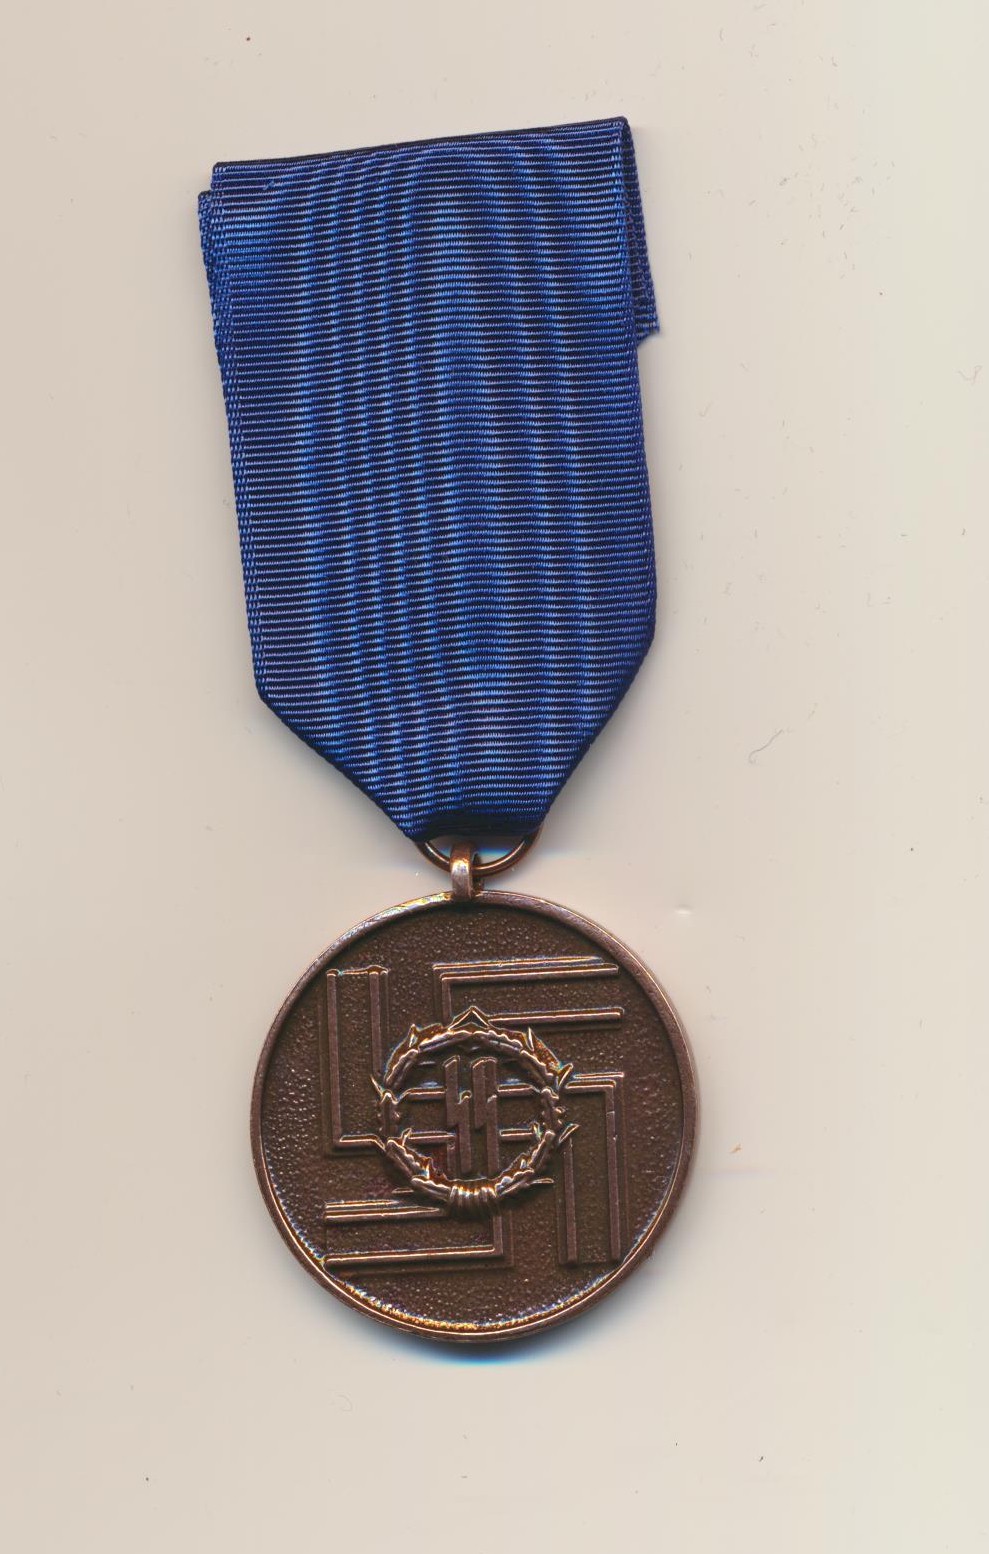 GERMAN SS SERVICE MEDAL - 8 YEAR